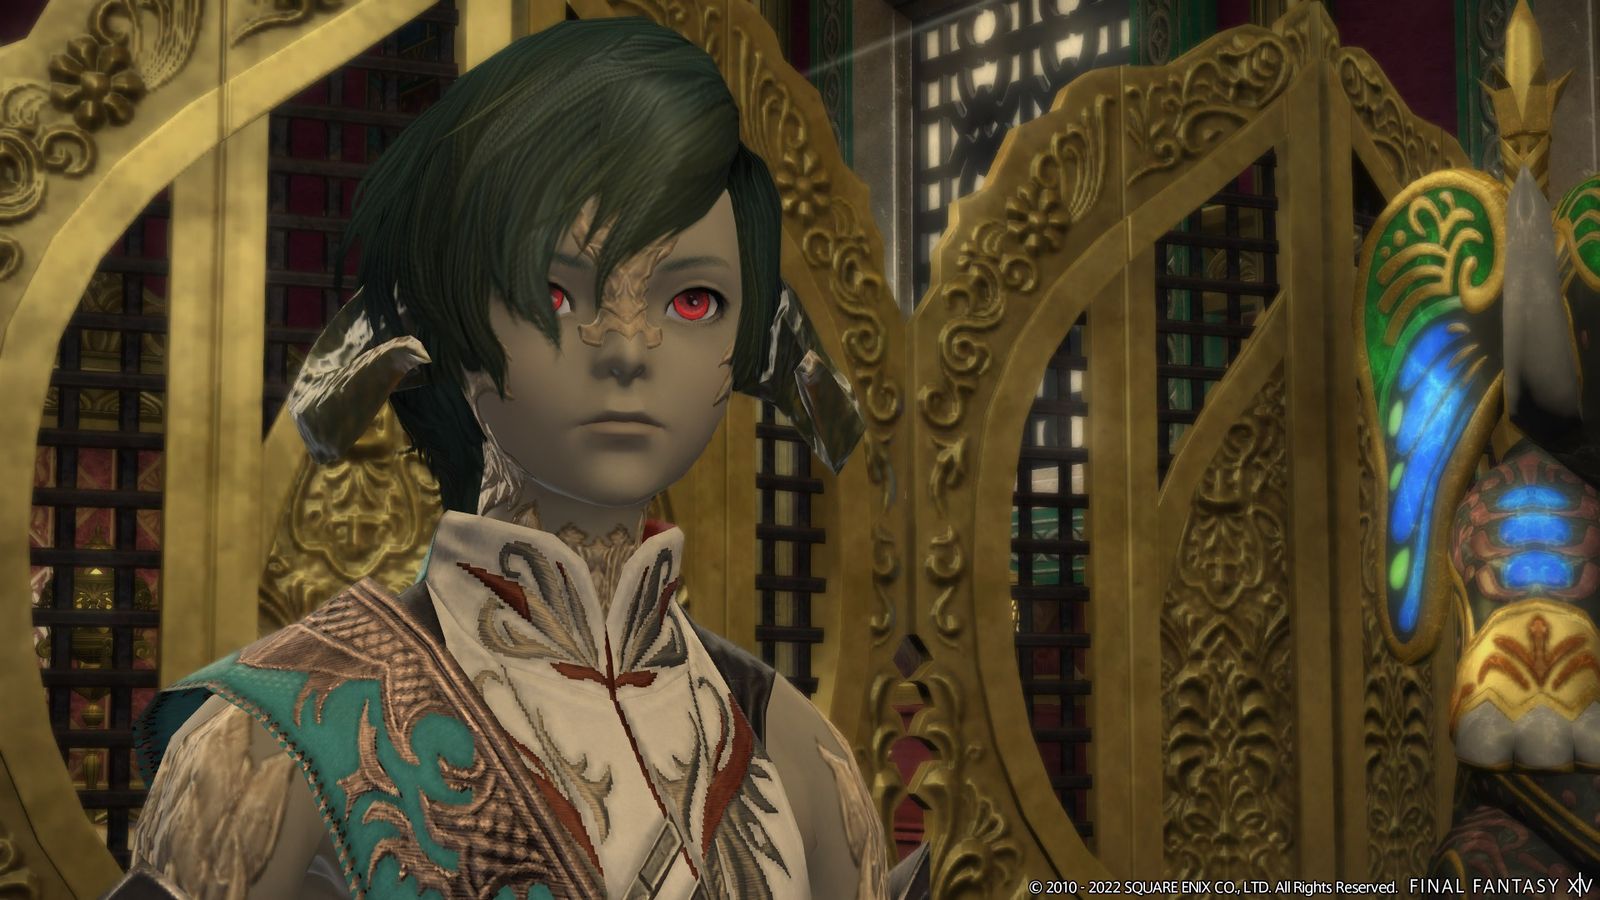 Vrtra will play a major role in the FFXIV 6.3 patch.